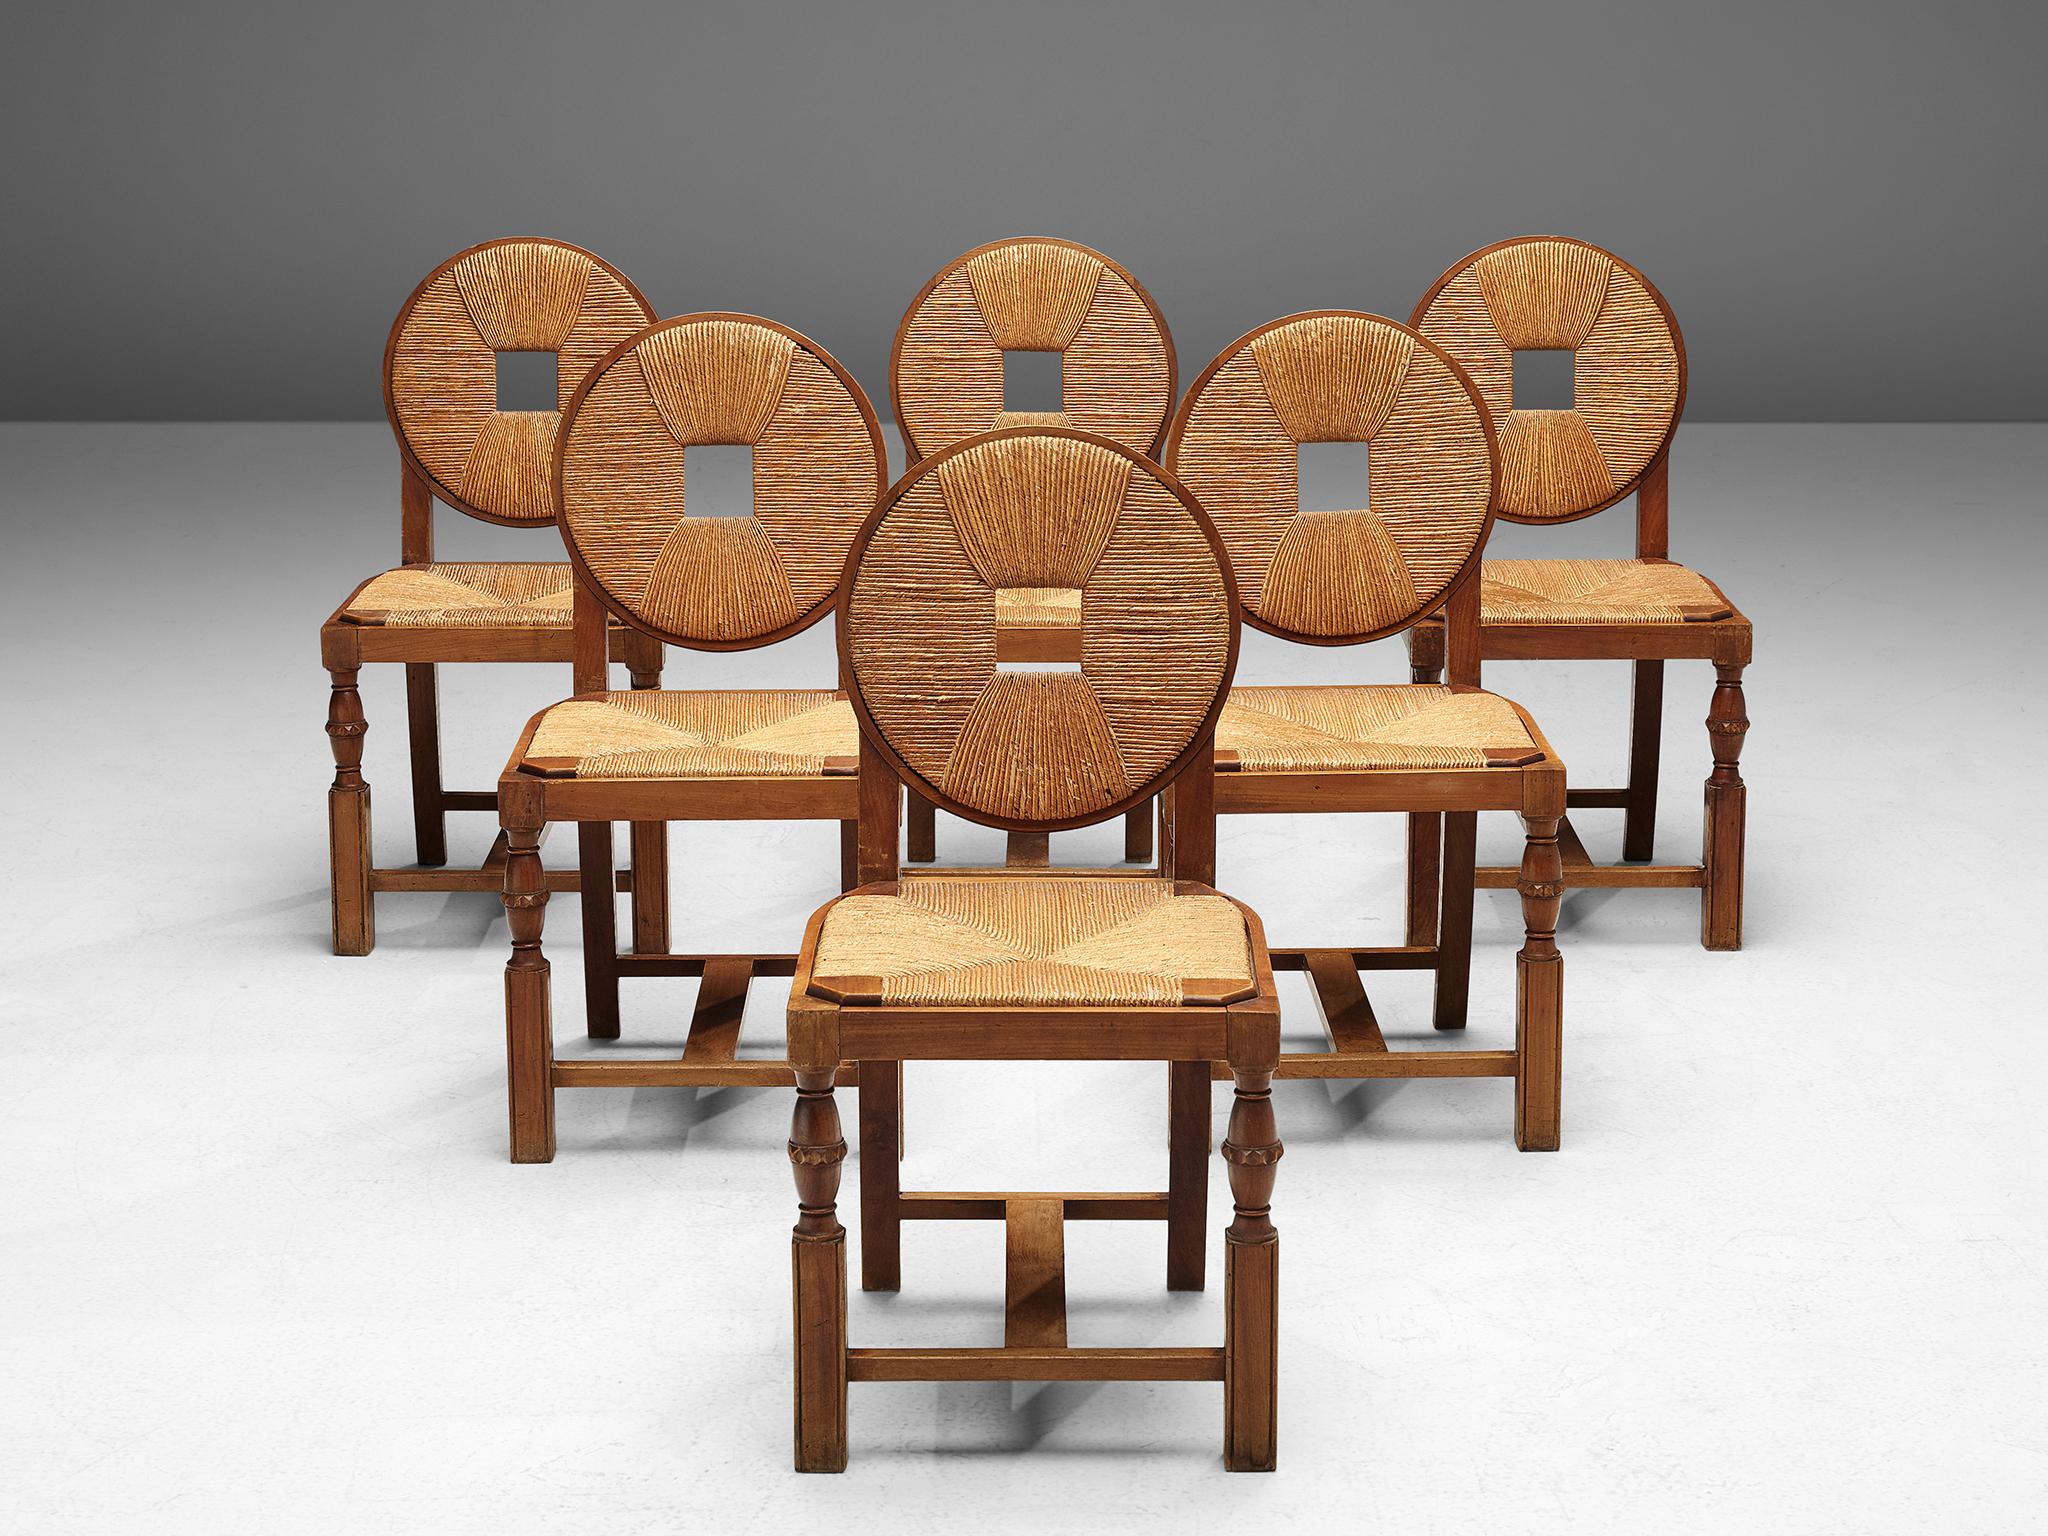 Set of six dining chairs, wicker and wood, 1940. 

Beautiful Arbus style, Art Deco dining chairs. This set has a round wicker back with a square detail it the centre, and a square wicker seat. The legs of the chair are sturdily designed, but have